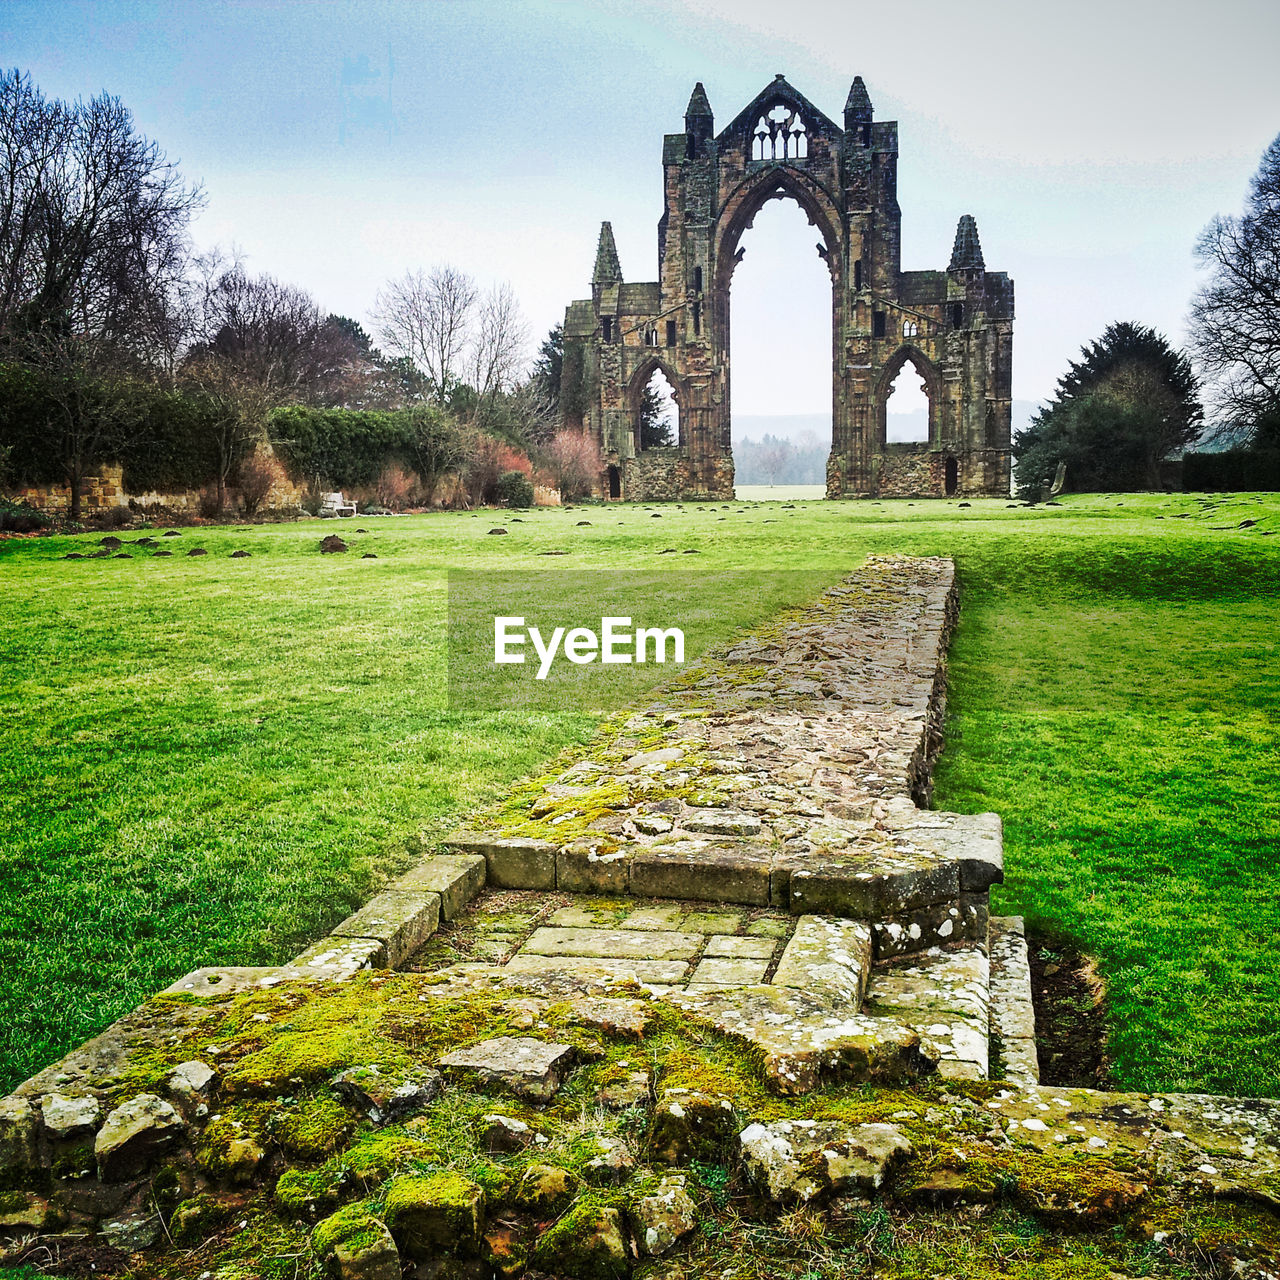 The ruins of gisborough priory in north yorkshire.